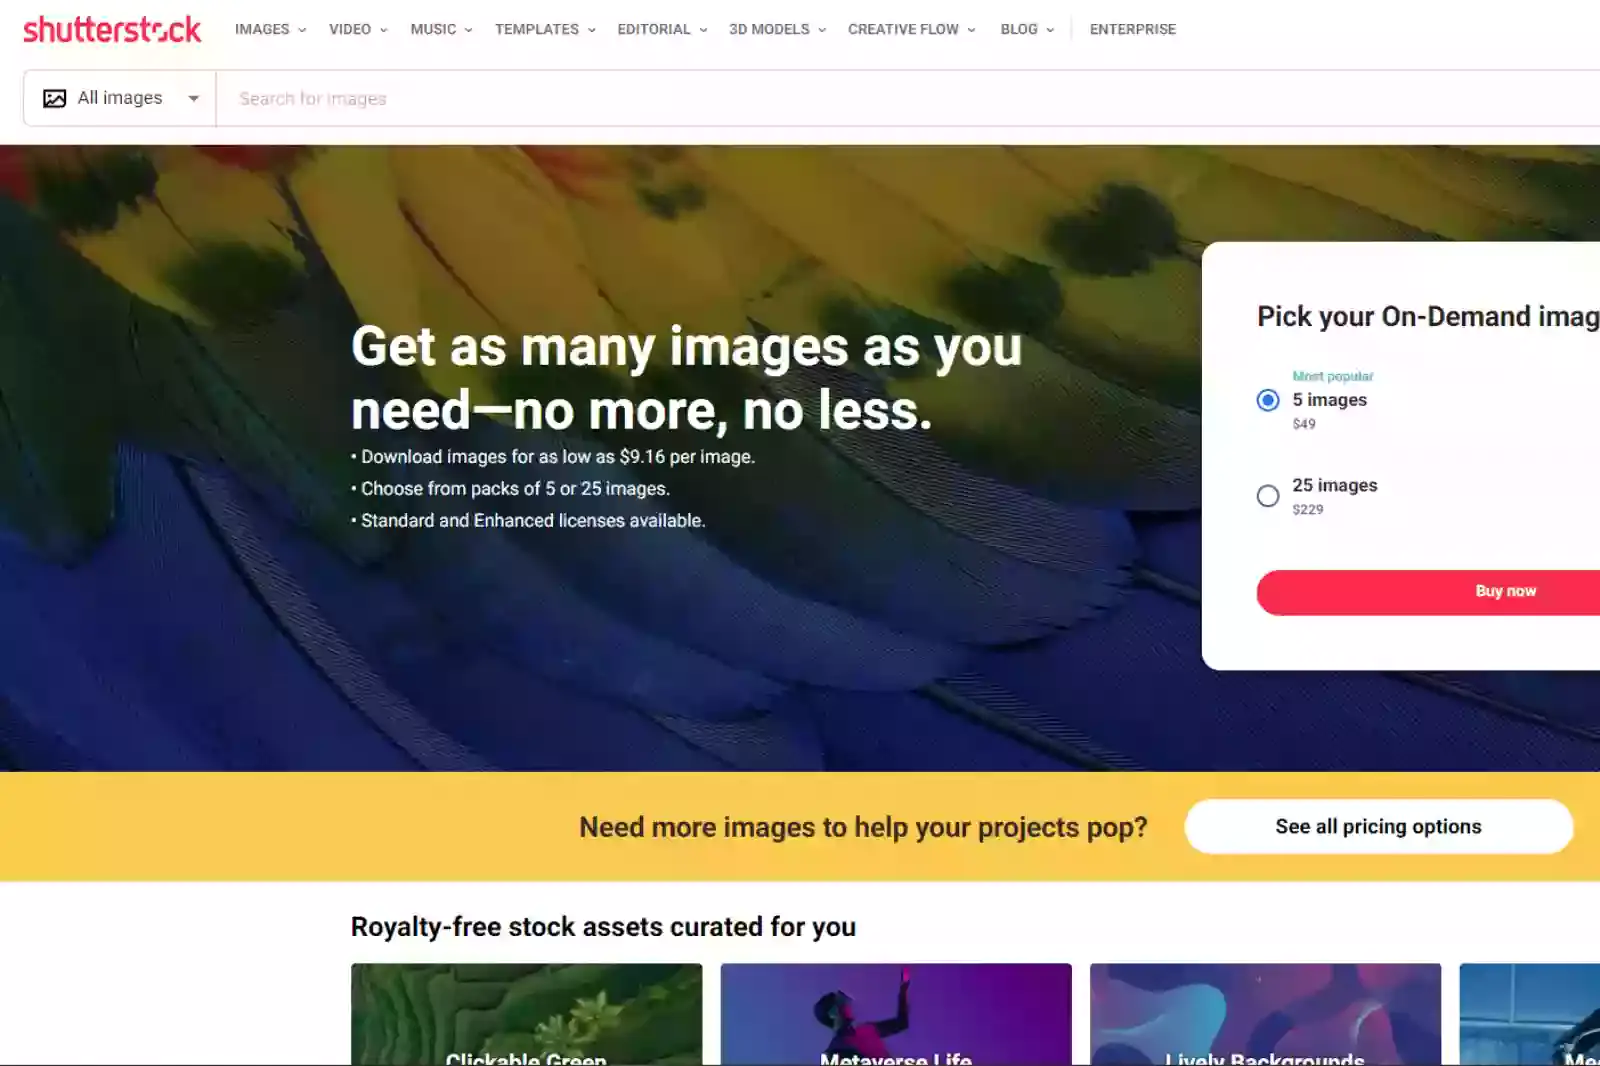 Home Page of Shutterstock